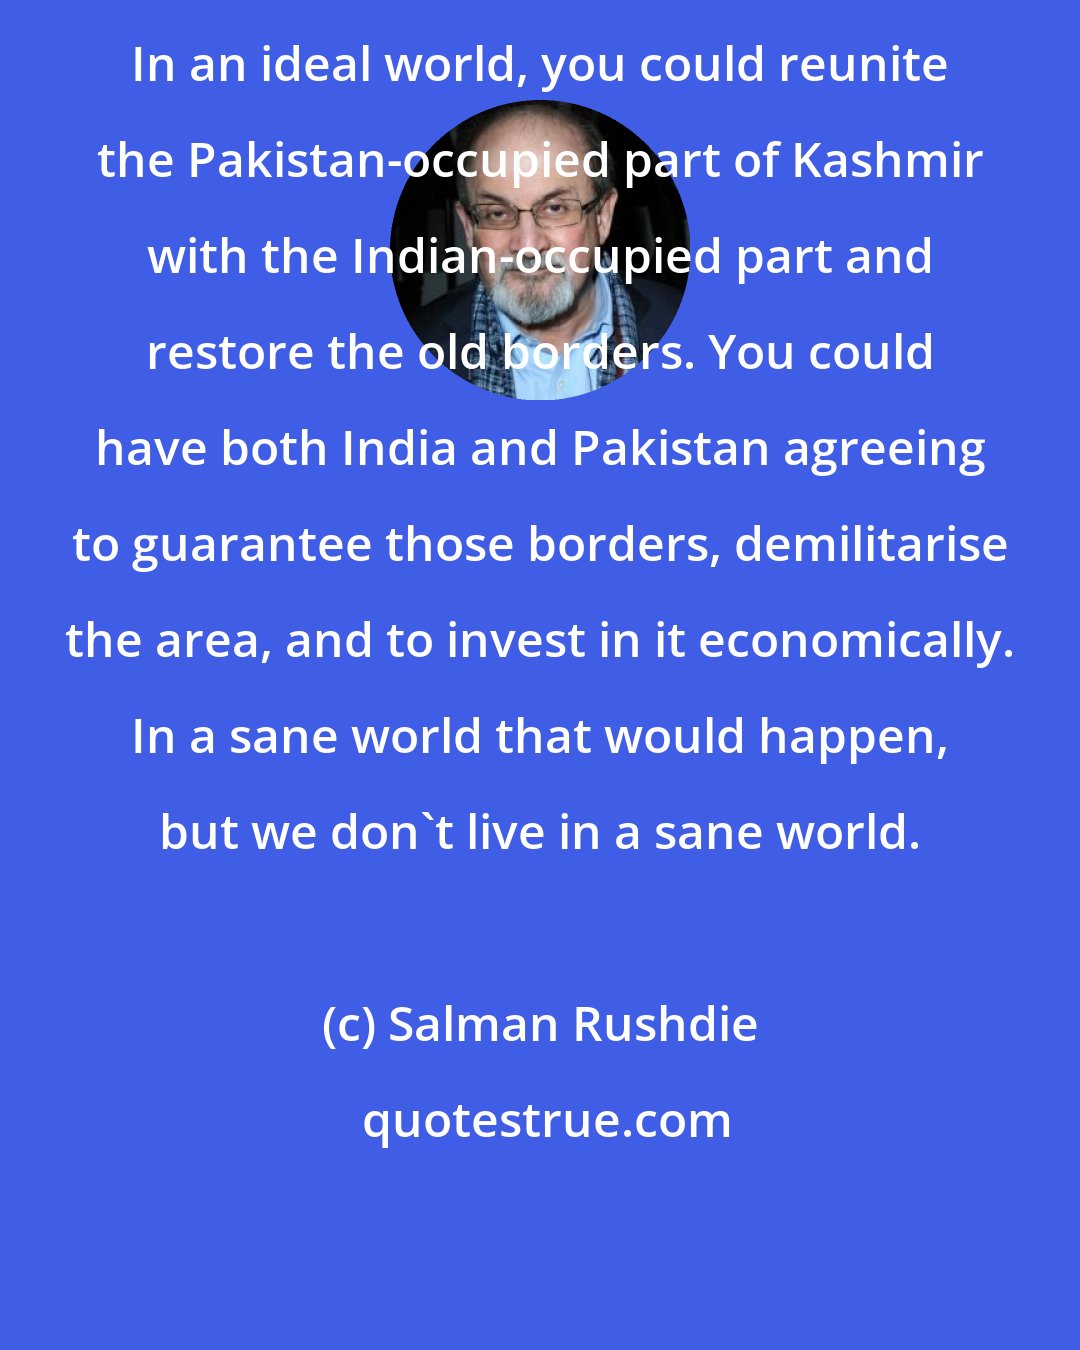 Salman Rushdie: In an ideal world, you could reunite the Pakistan-occupied part of Kashmir with the Indian-occupied part and restore the old borders. You could have both India and Pakistan agreeing to guarantee those borders, demilitarise the area, and to invest in it economically. In a sane world that would happen, but we don't live in a sane world.